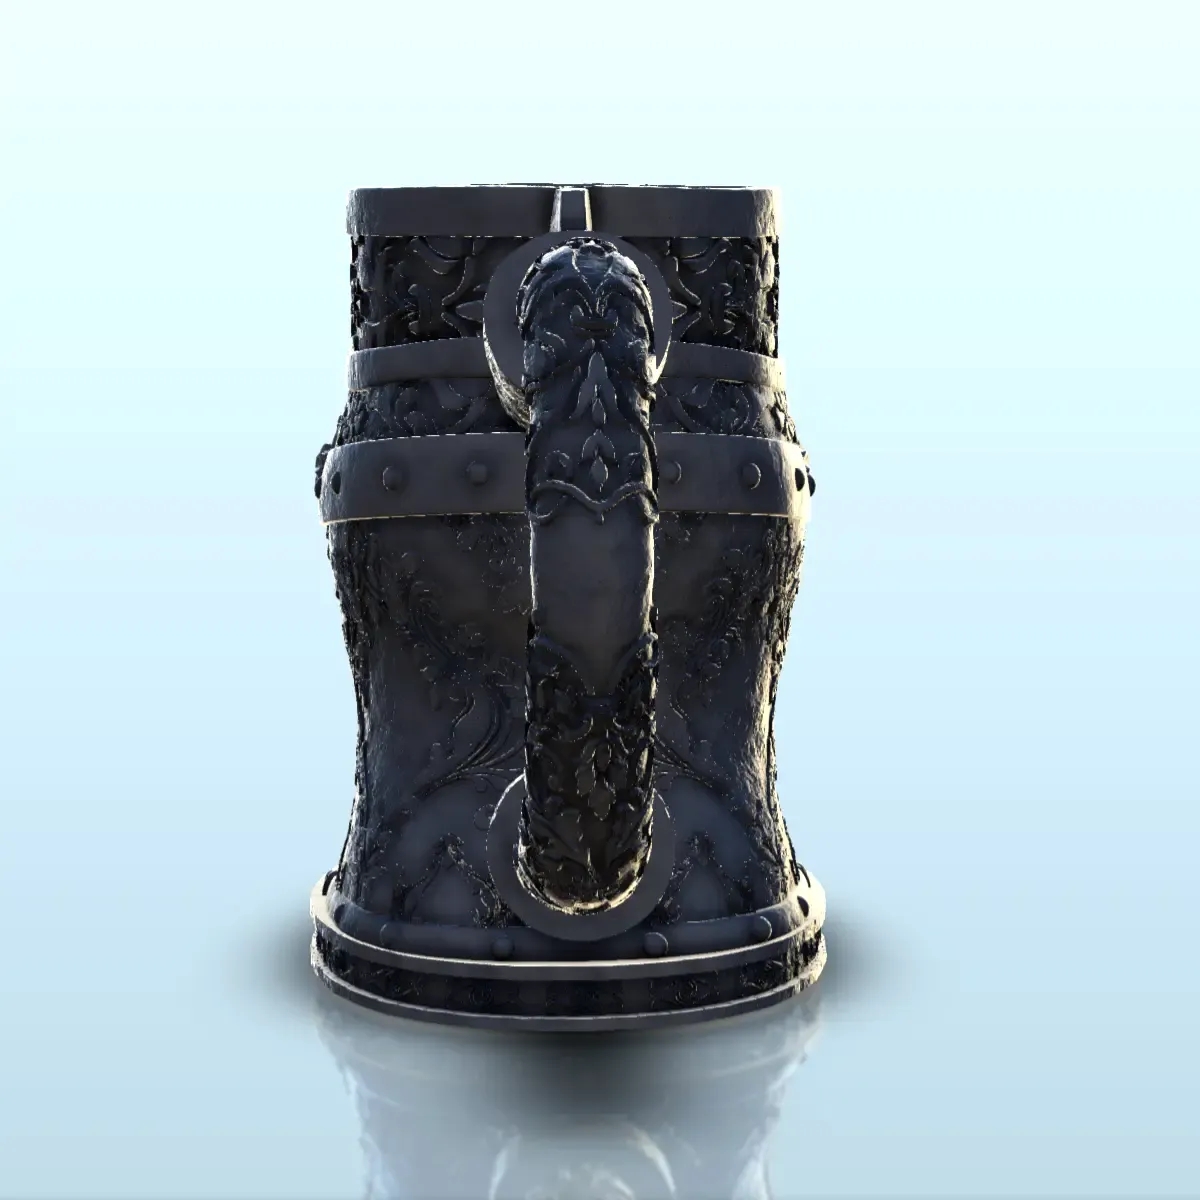 Knight in armour dice mug (14) - beer can holder